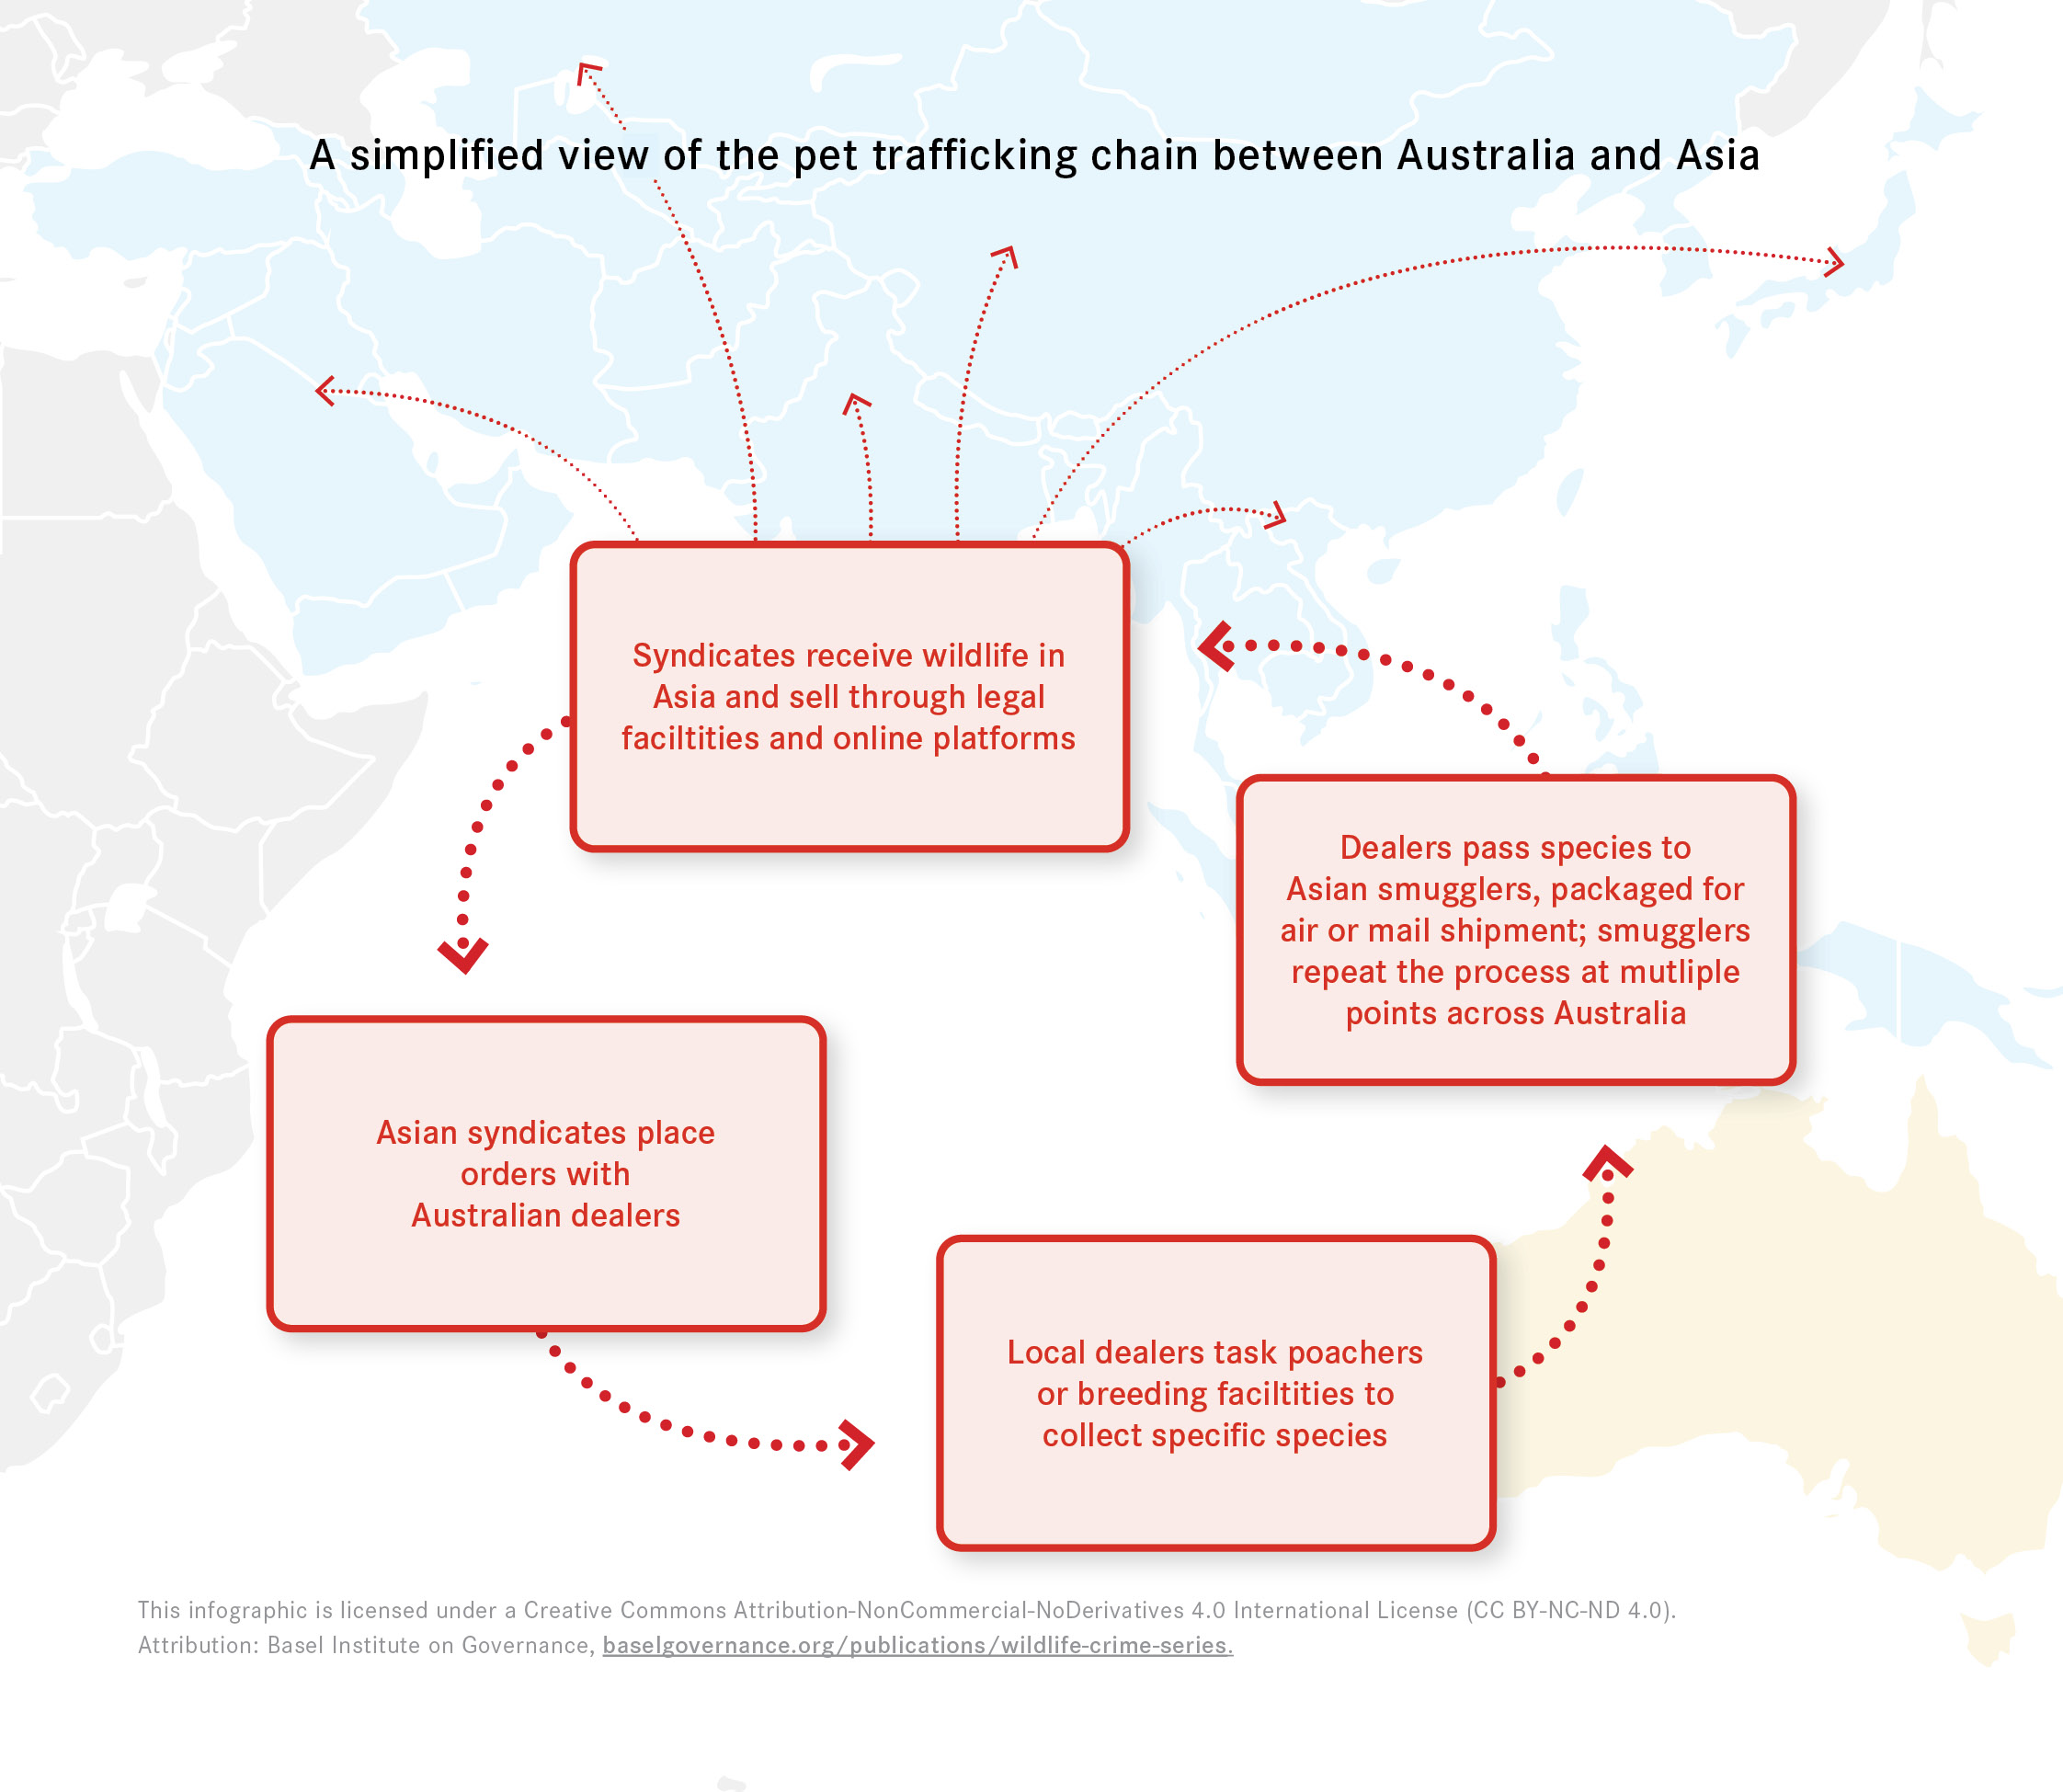 A simplified view of the pet trafficking chain between Australia and Asia